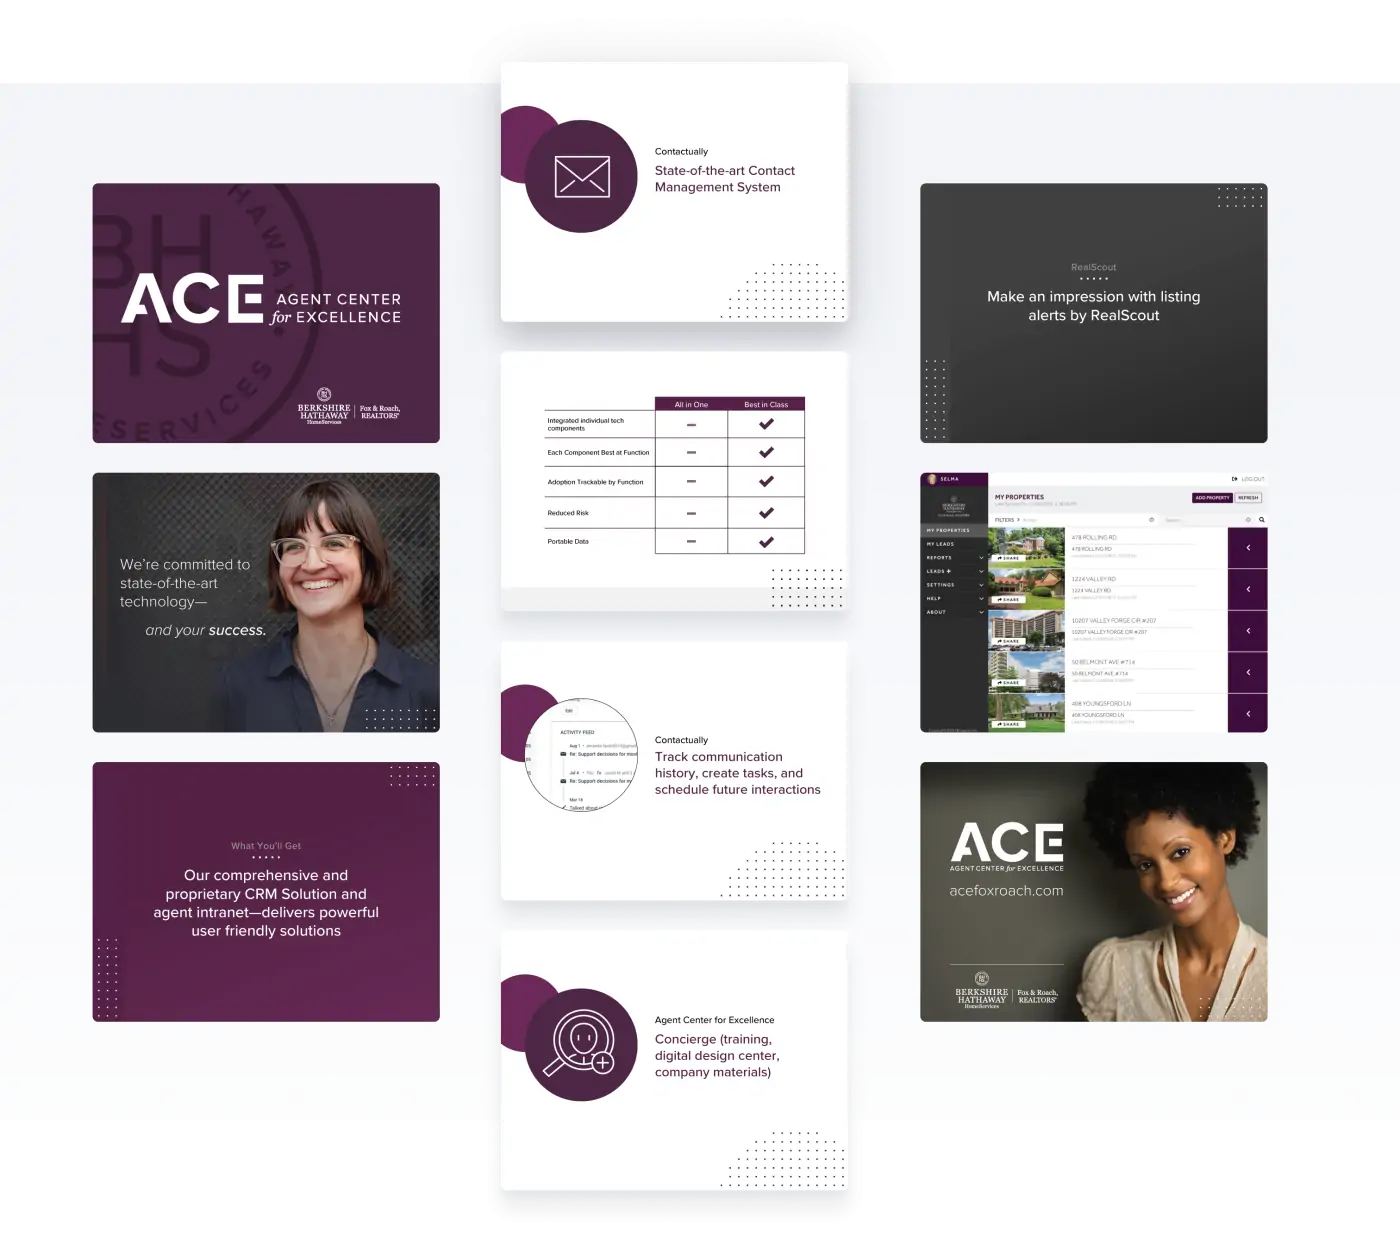 slides featuring the ACE logo and happy people